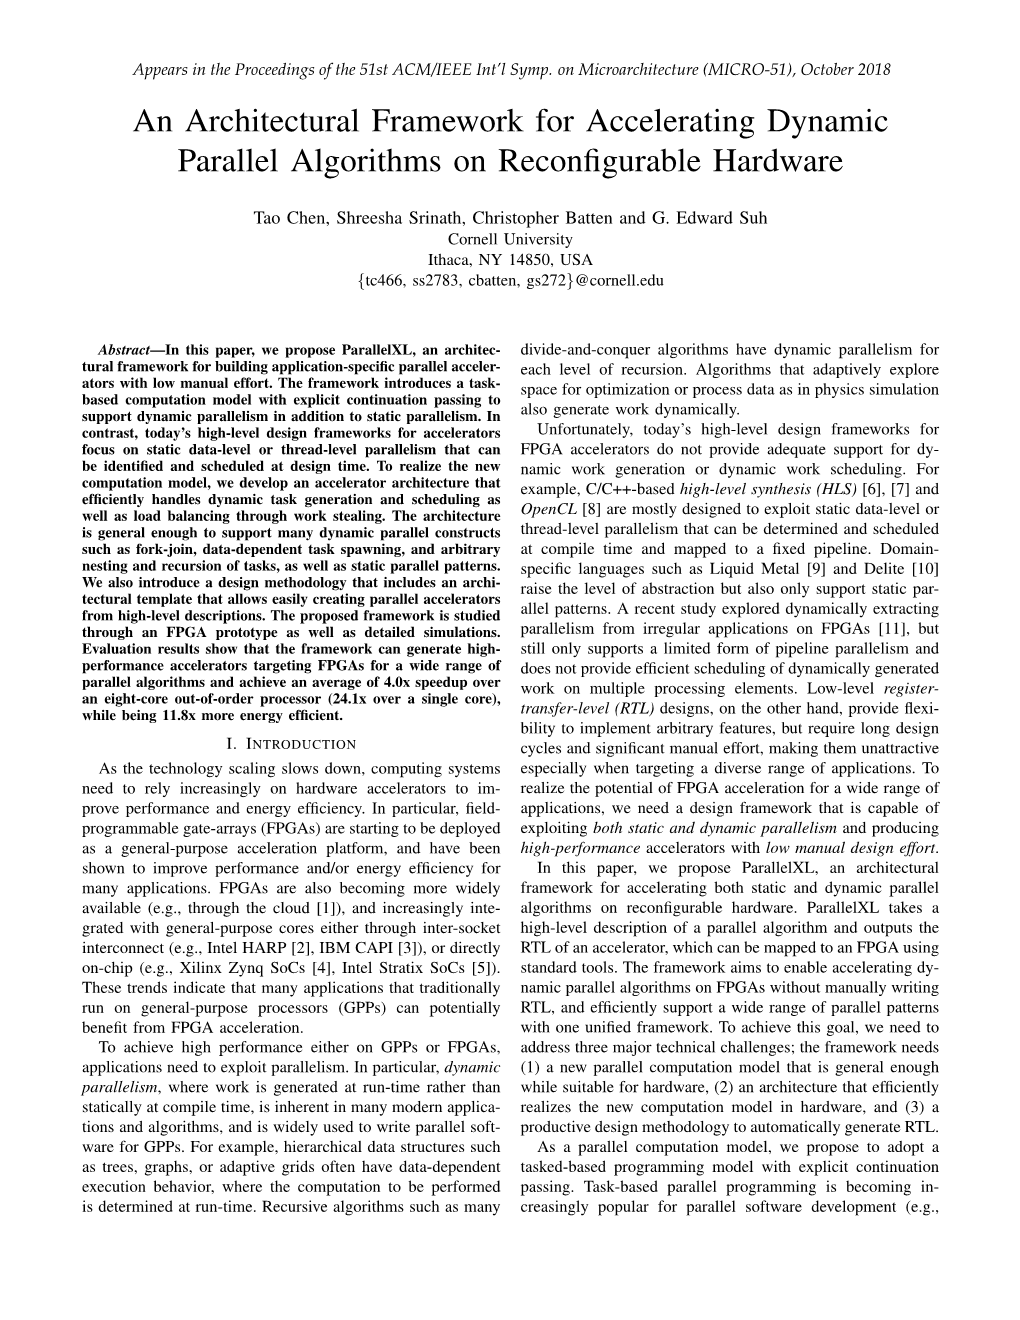 An Architectural Framework for Accelerating Dynamic Parallel Algorithms on Reconﬁgurable Hardware